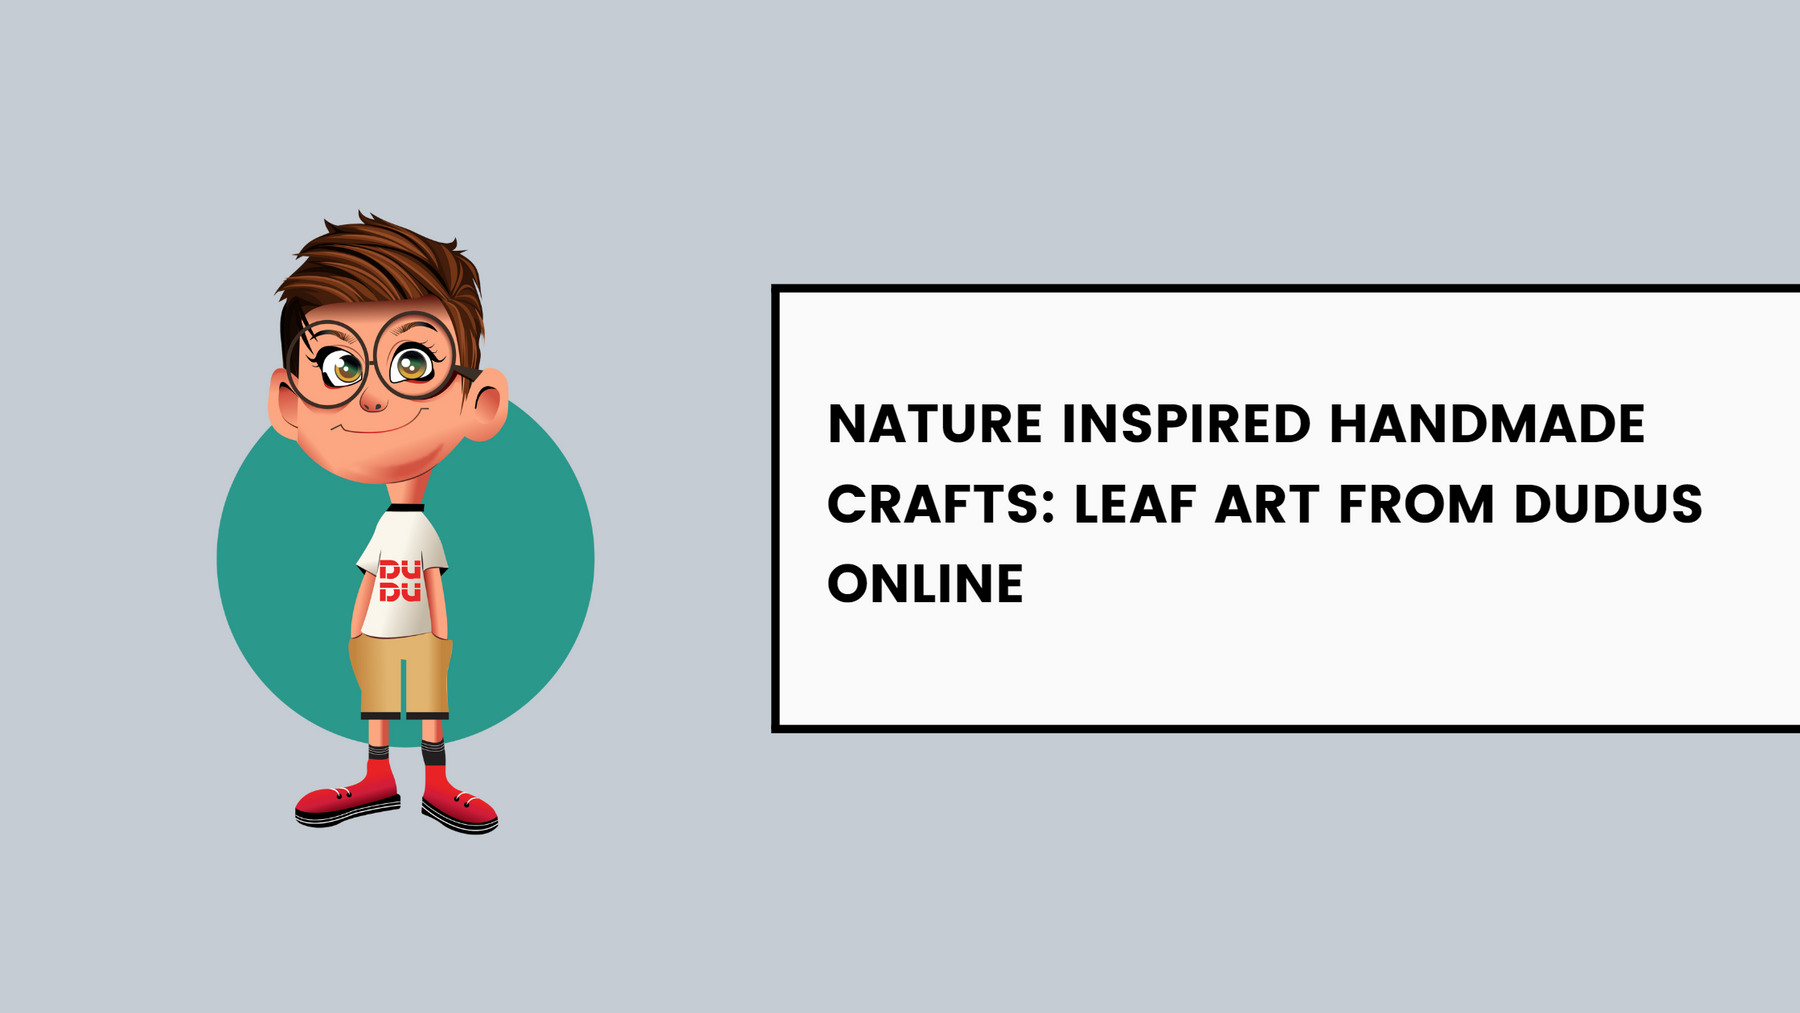 Nature Inspired Handmade Crafts: Leaf Art From Dudus Online